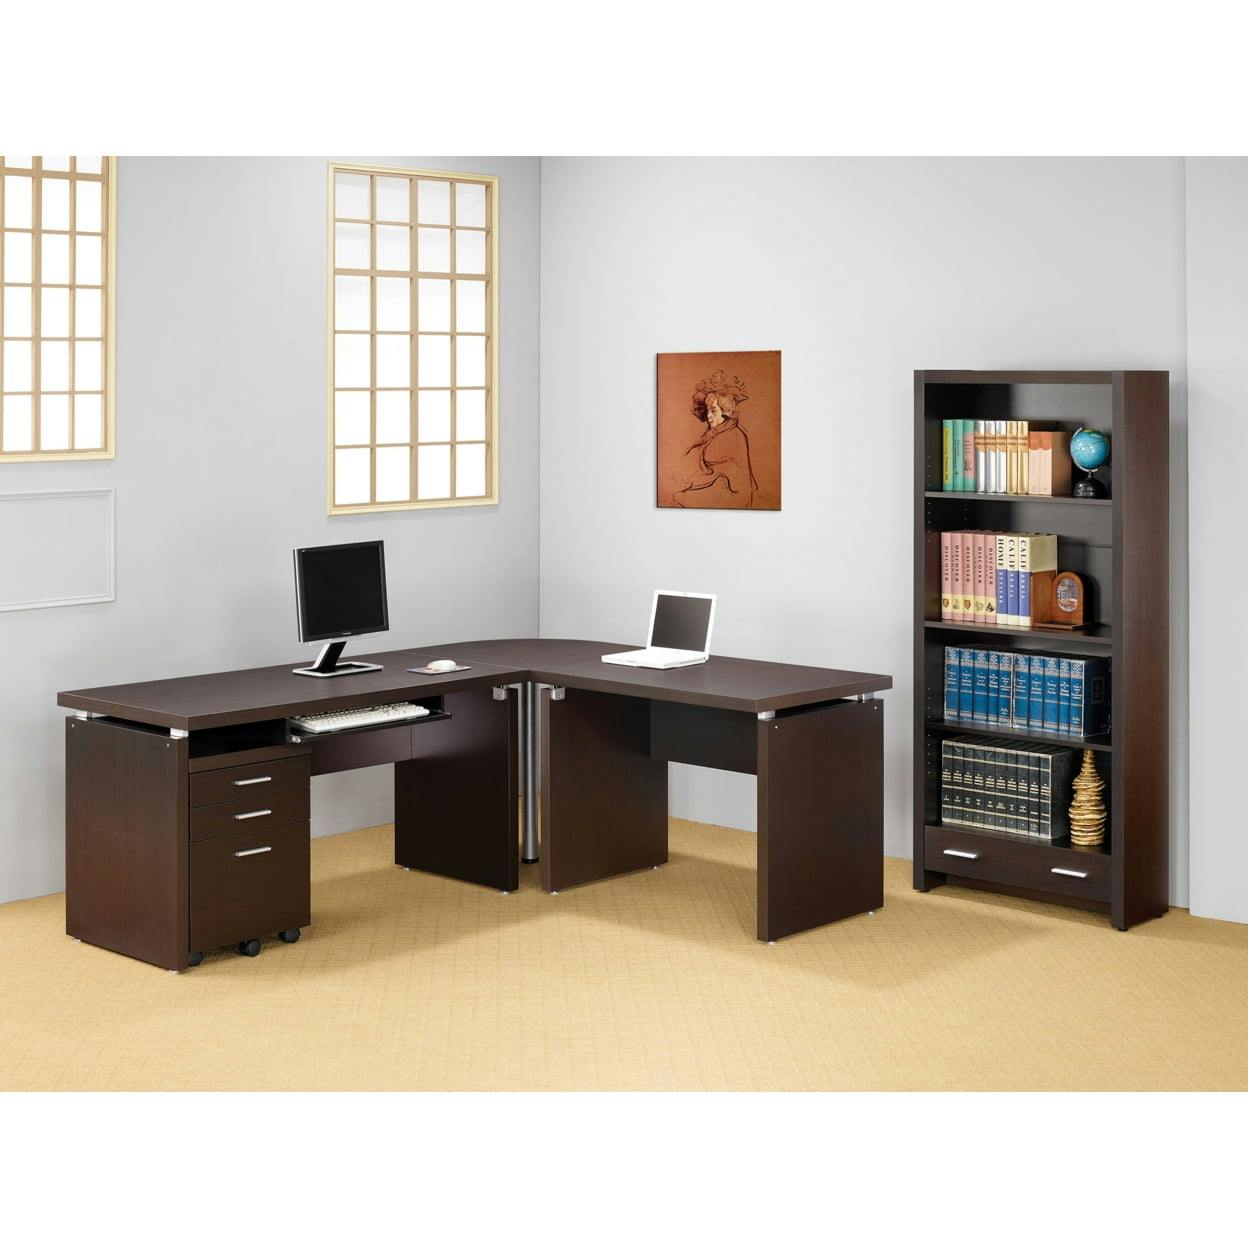 Espresso Transitional Home Office Desk with Keyboard Tray and Filing Cabinet